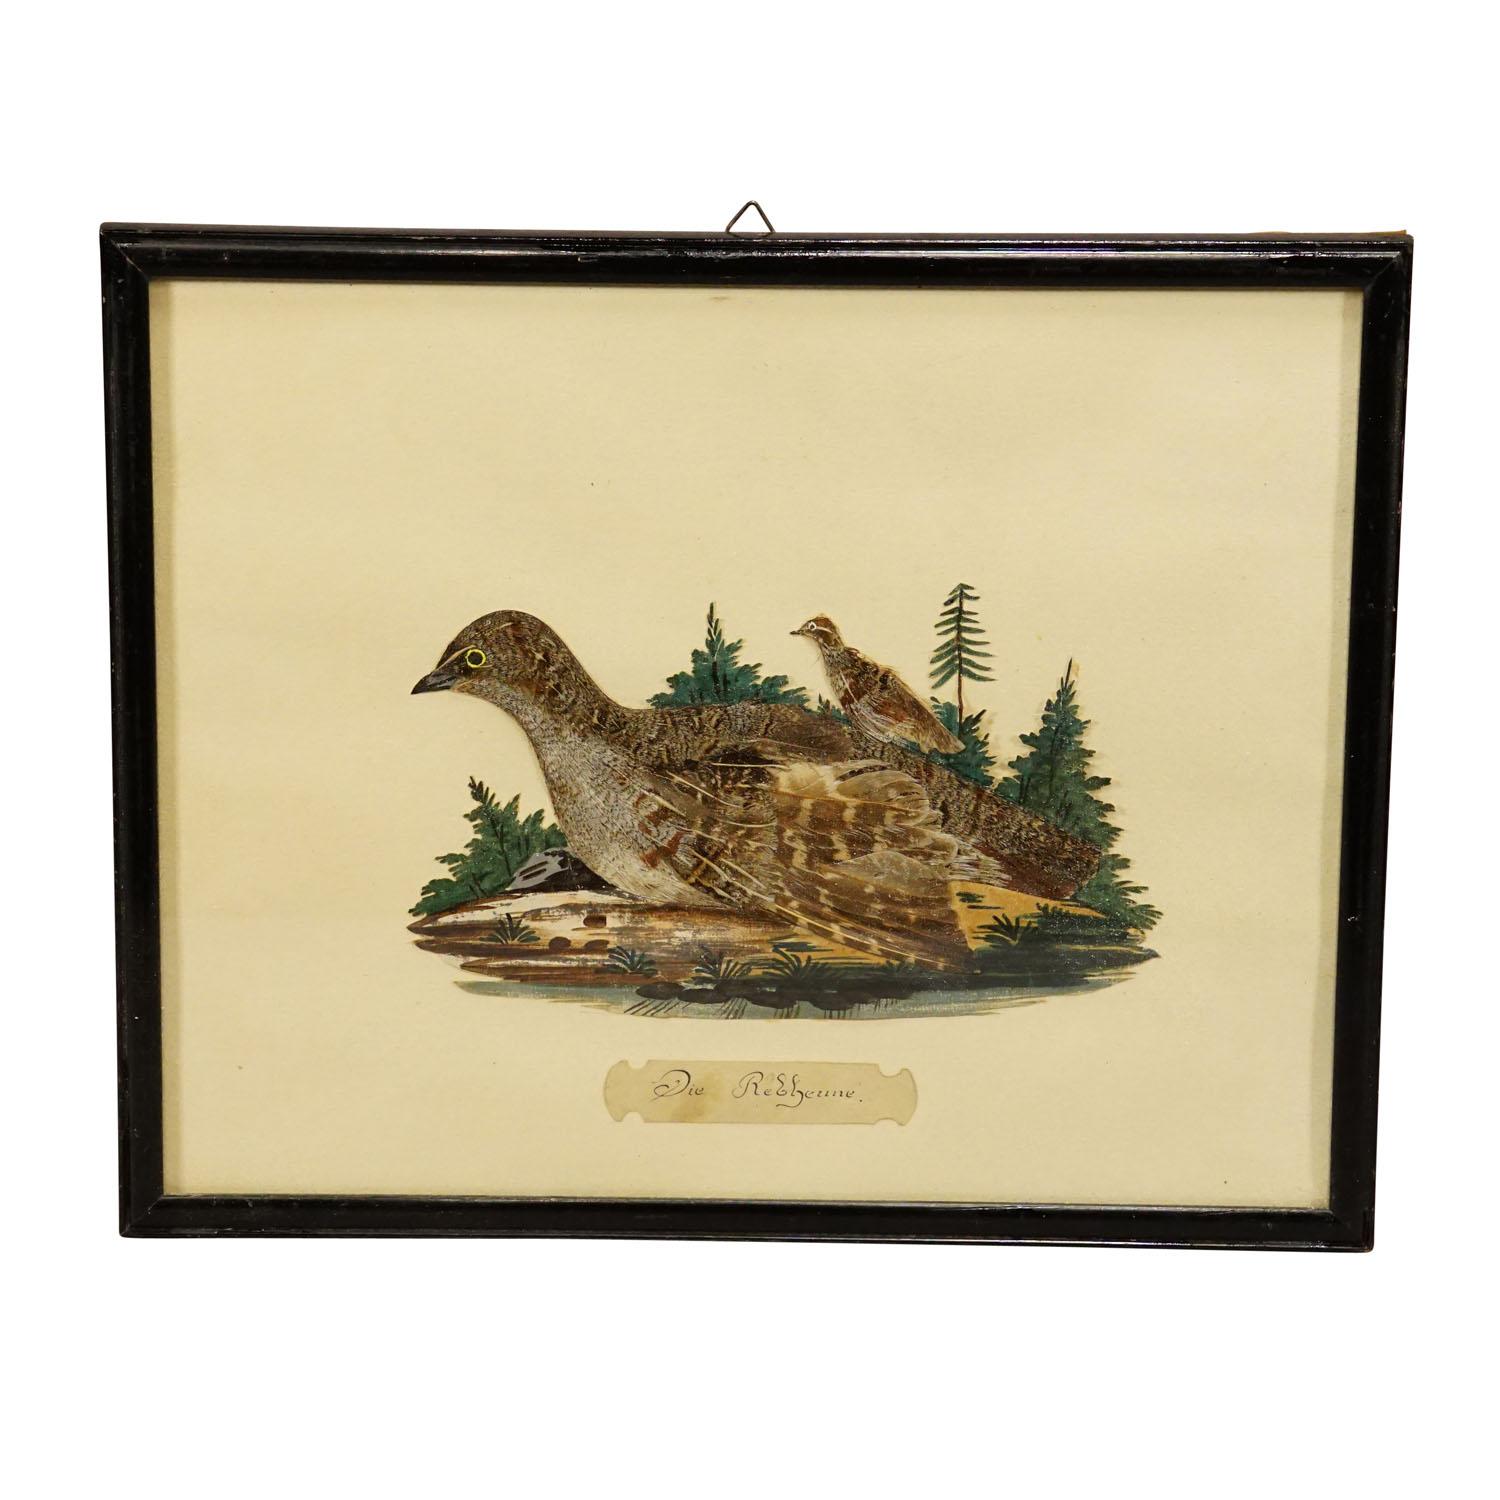 Victorian Taxidermy Diorama with Partridge, Germany ca. 1900

An antique diorama with a taxidermied partridge (Perdix perdix) sitting in a handpainted landscape. Mounted in an ebonized frame with glass coverage. Germany, ca. 1900.

This article